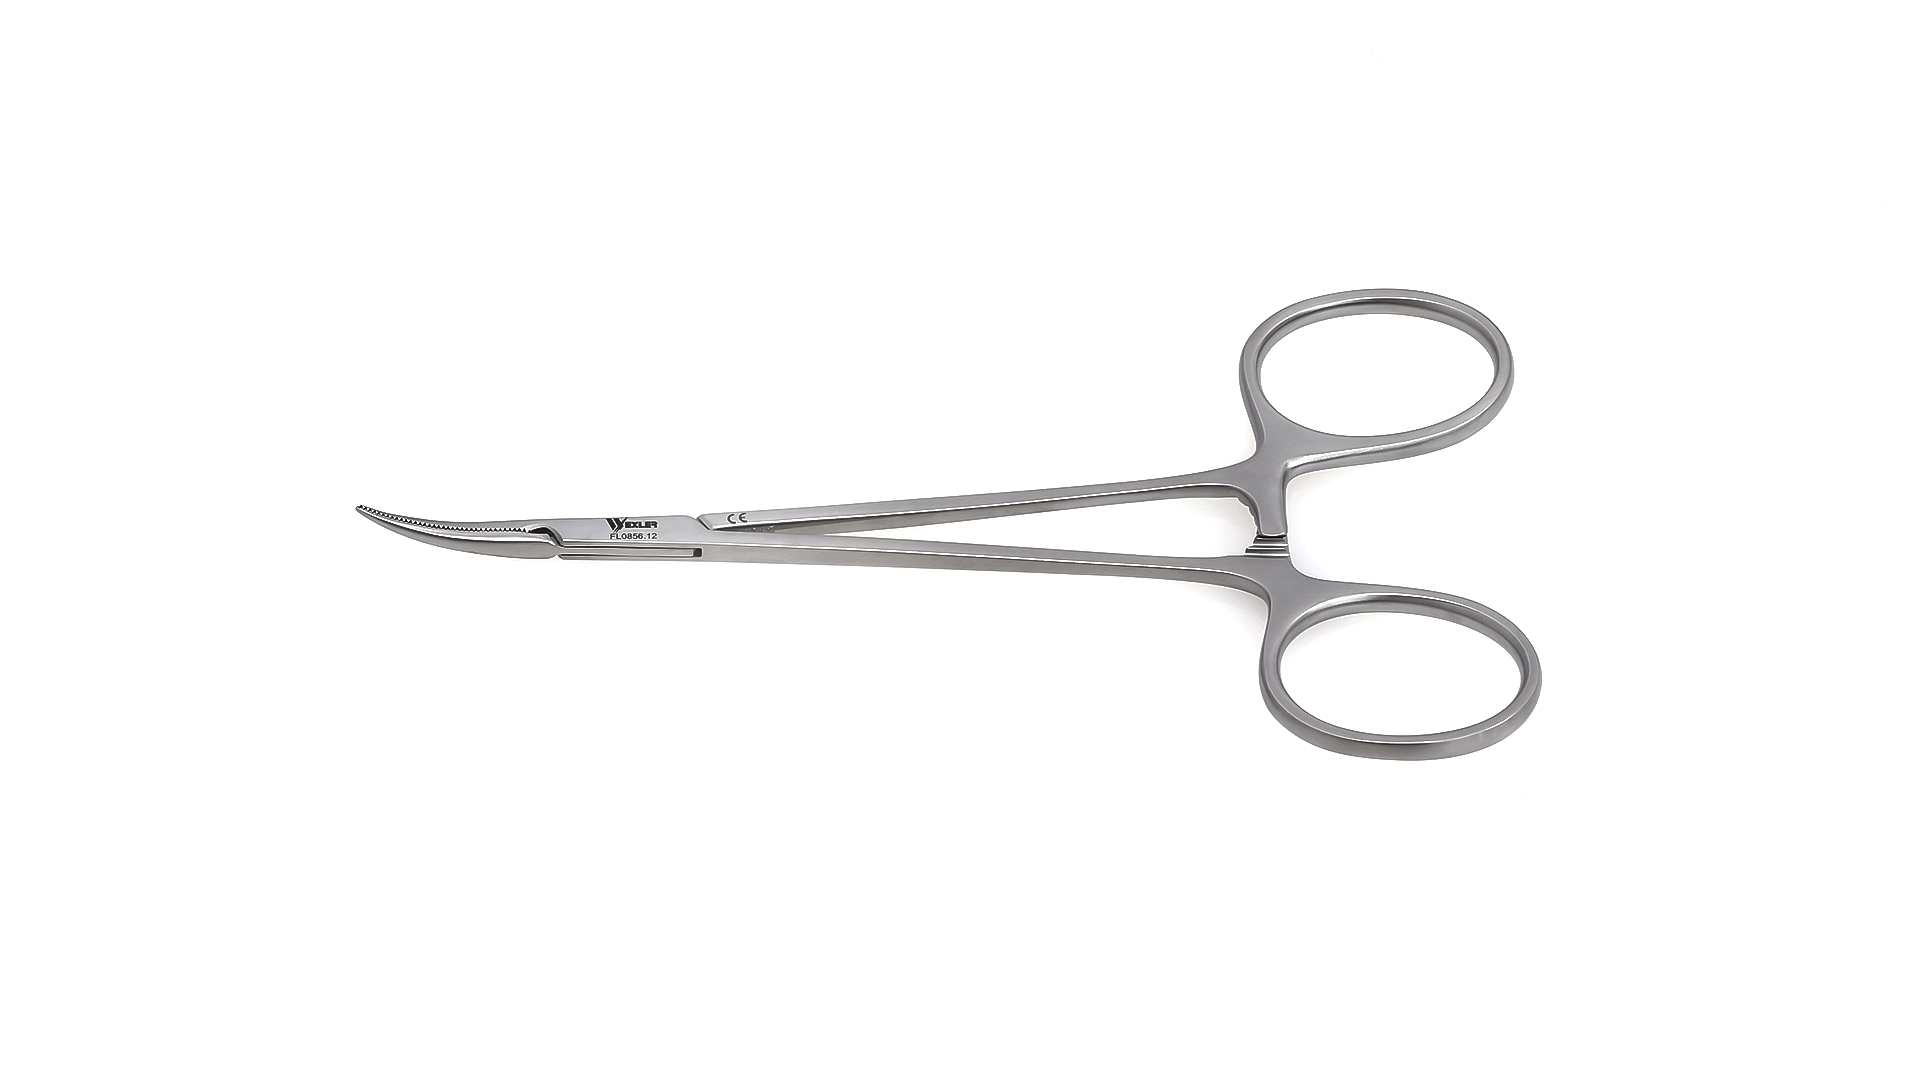 Halstead Forceps - Curved serrated jaws